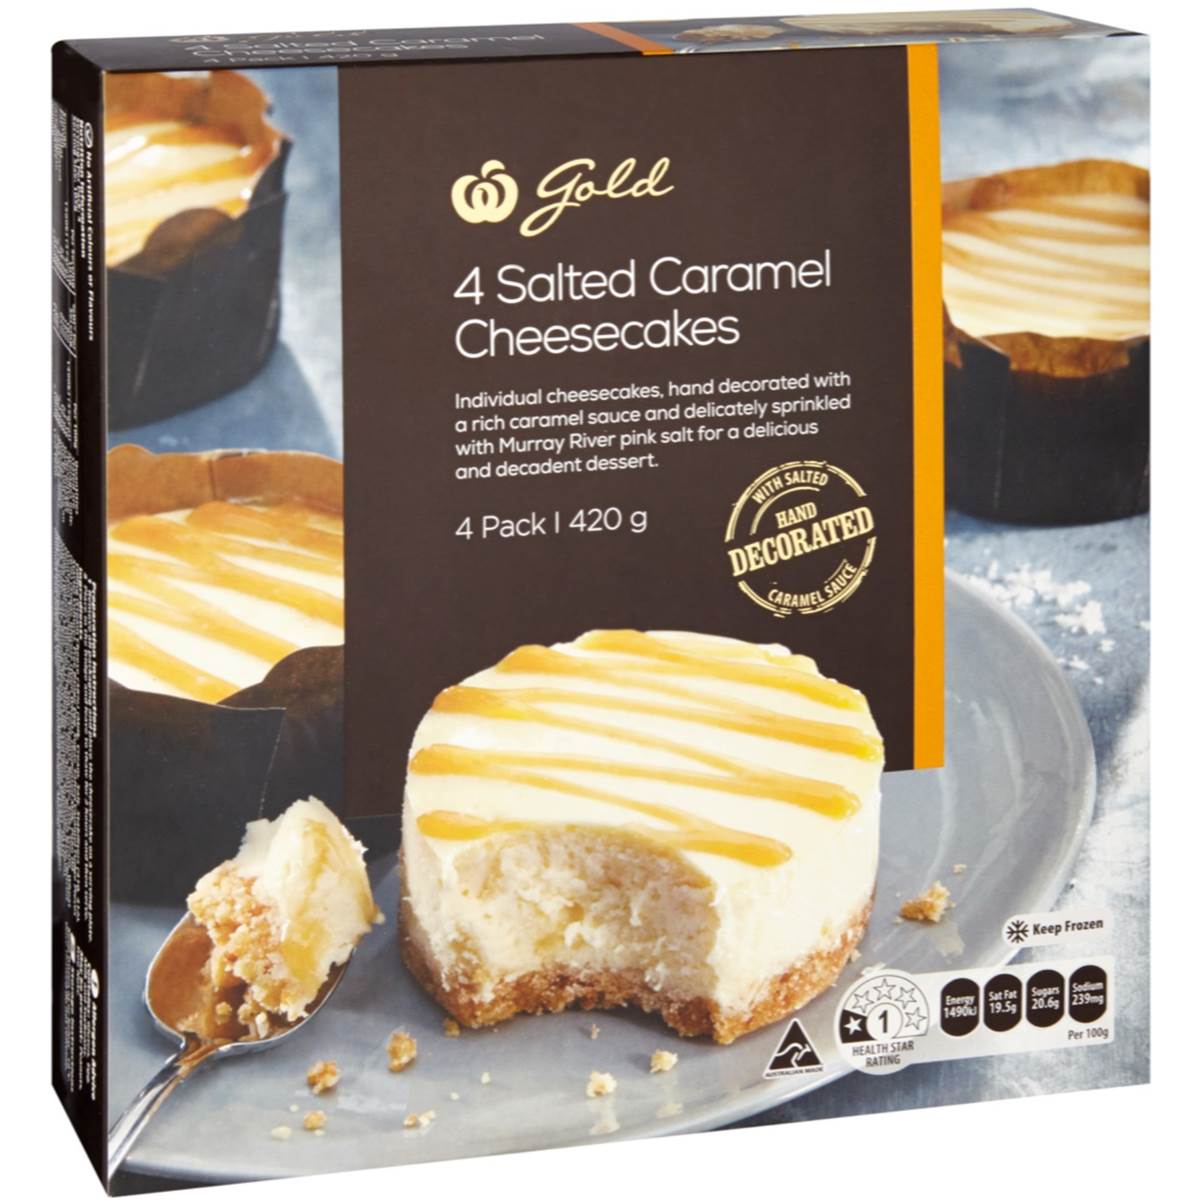 Woolworths Gold Salted Caramel Baked Cheesecake 4pk